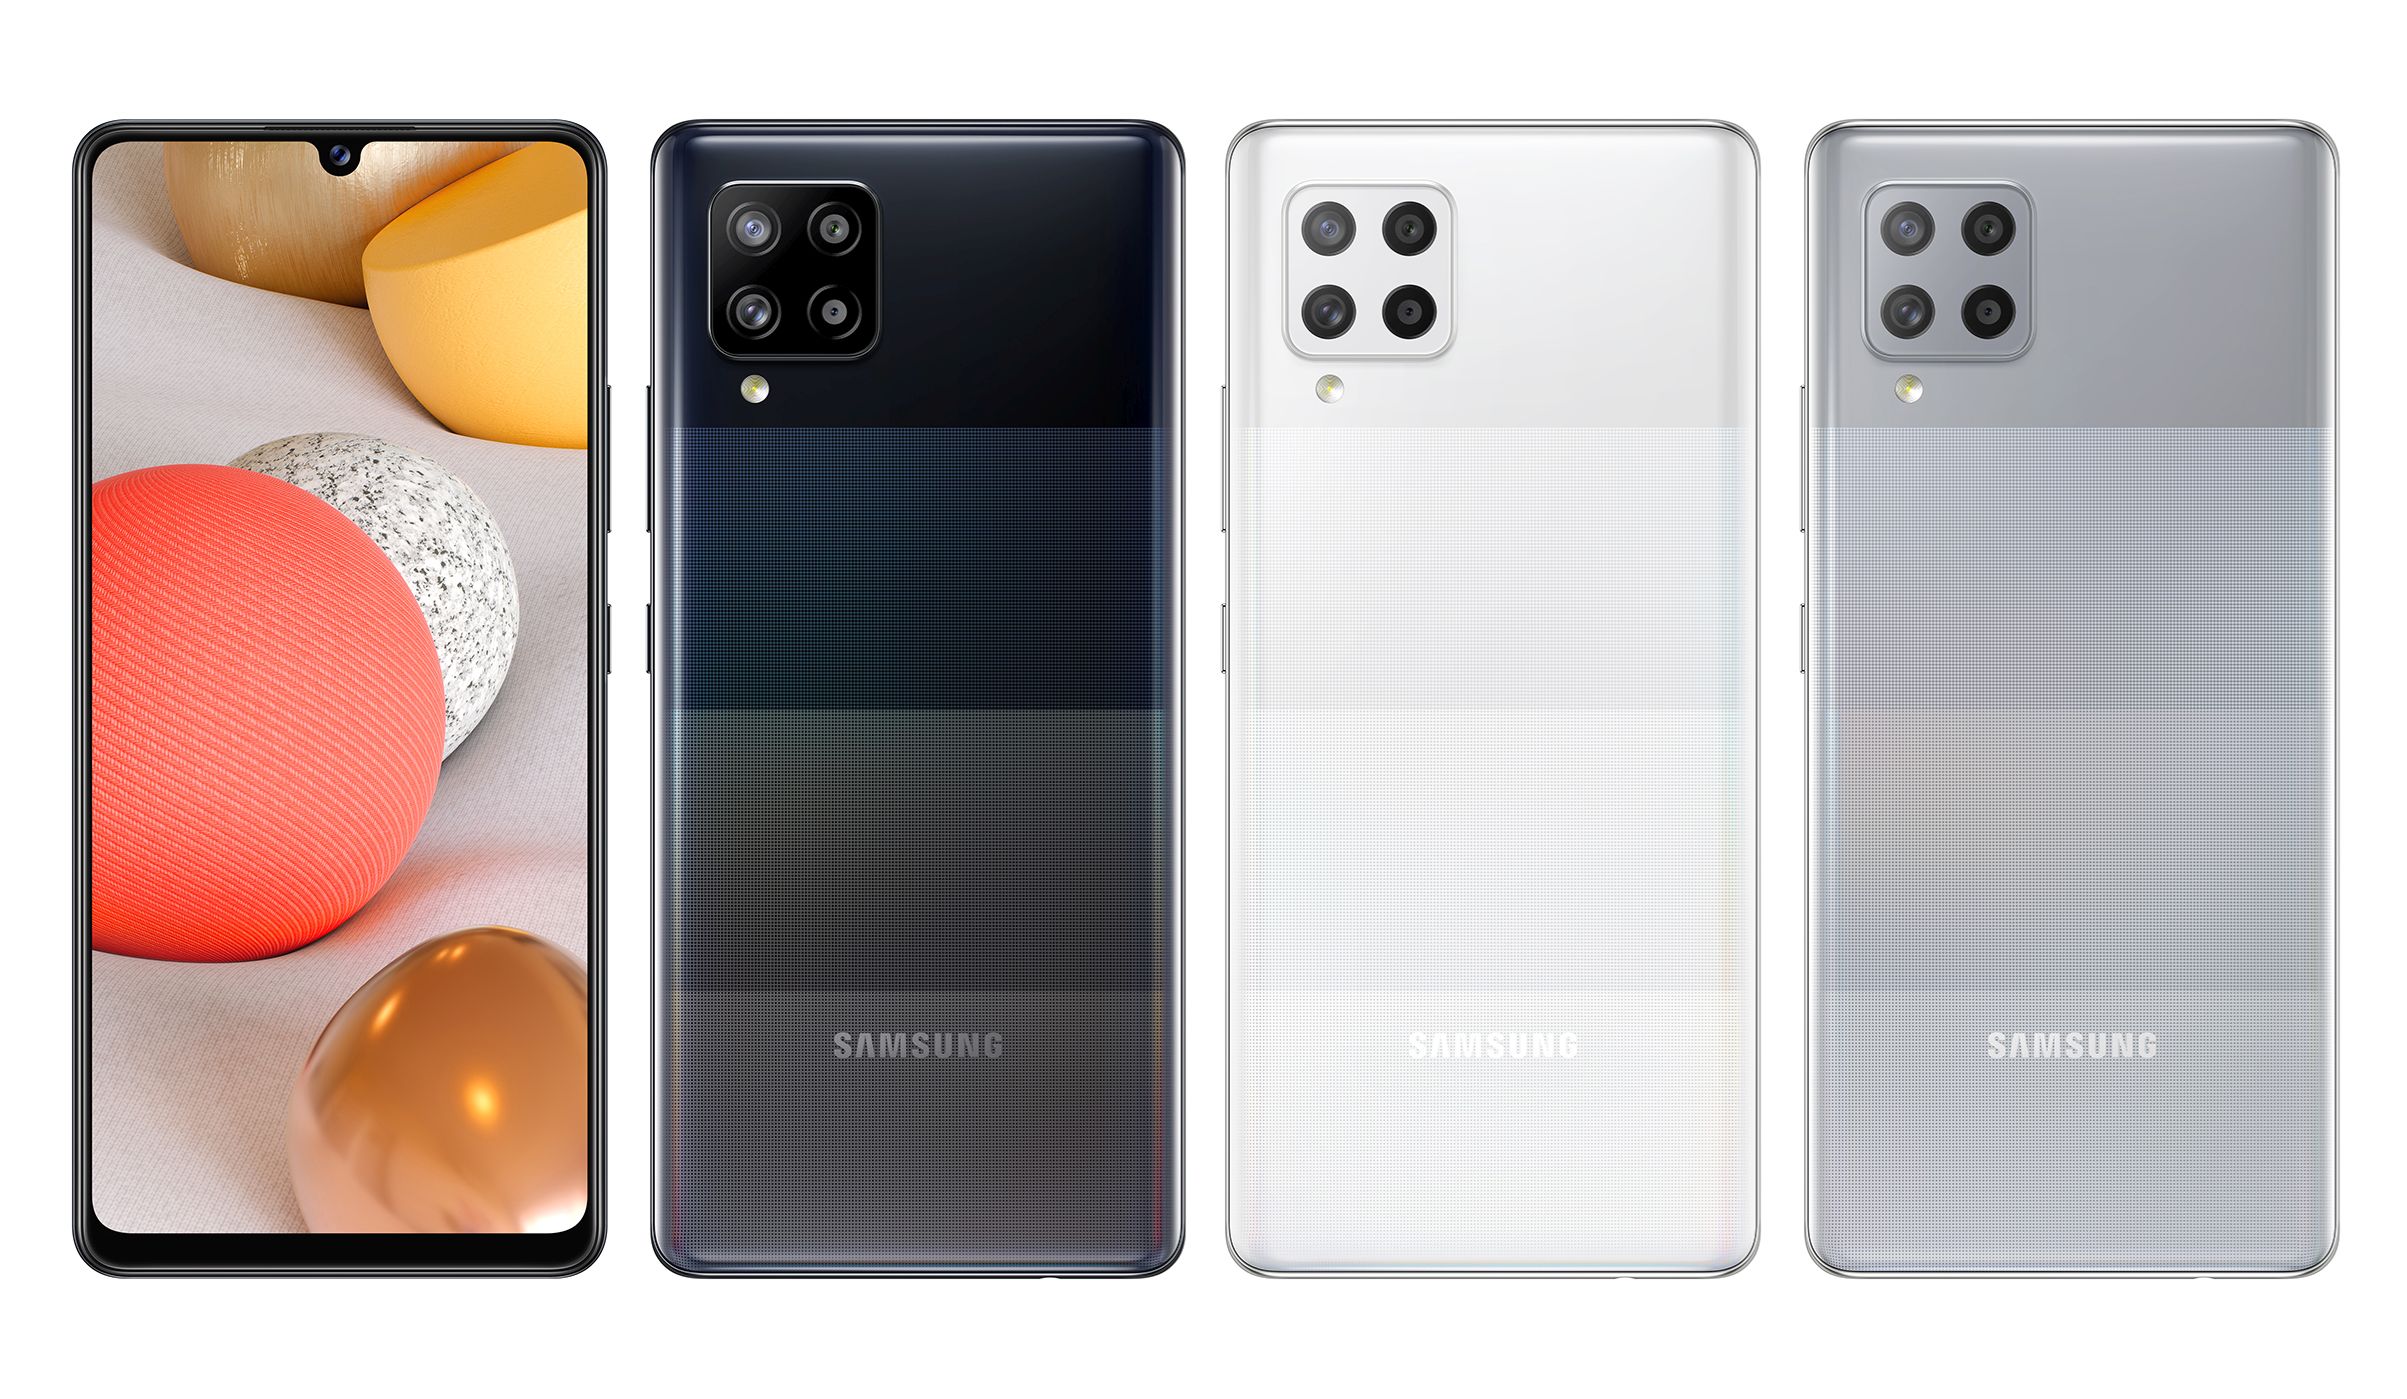 Samsung Galaxy A42 5G official renders showcase its color variants